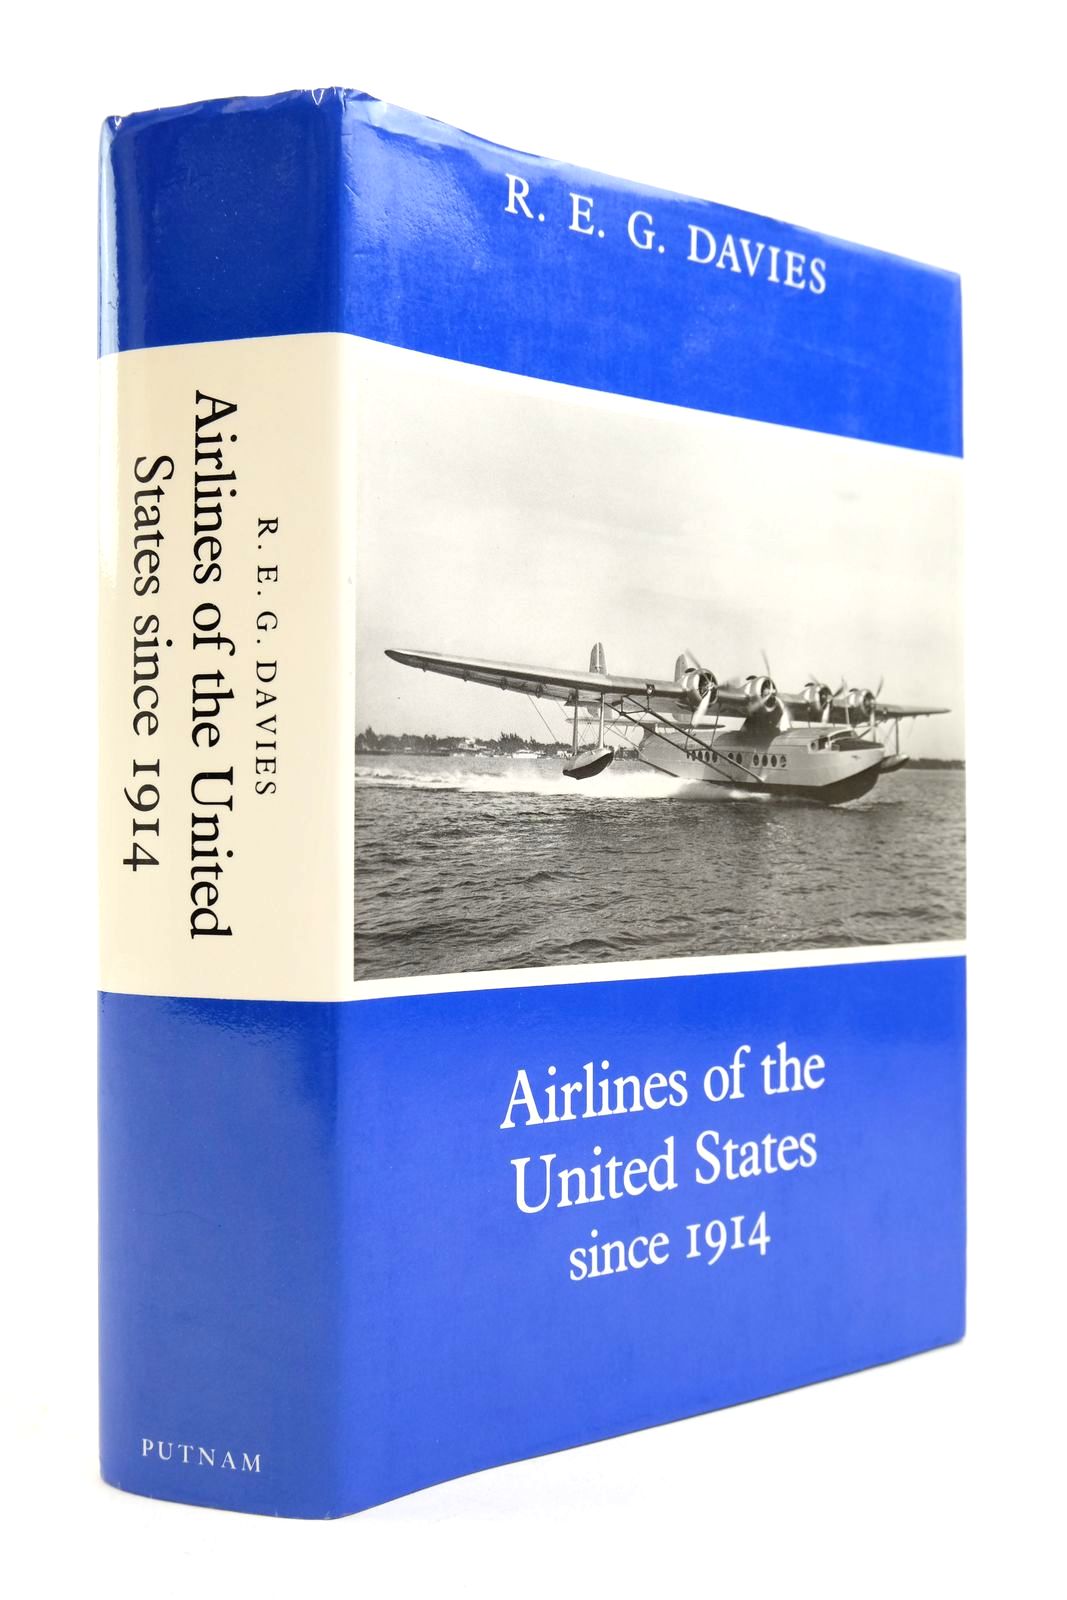 Photo of AIRLINES OF THE UNITED STATES SINCE 1914 written by Davies, R.E.G. published by Putnam (STOCK CODE: 2139099)  for sale by Stella & Rose's Books